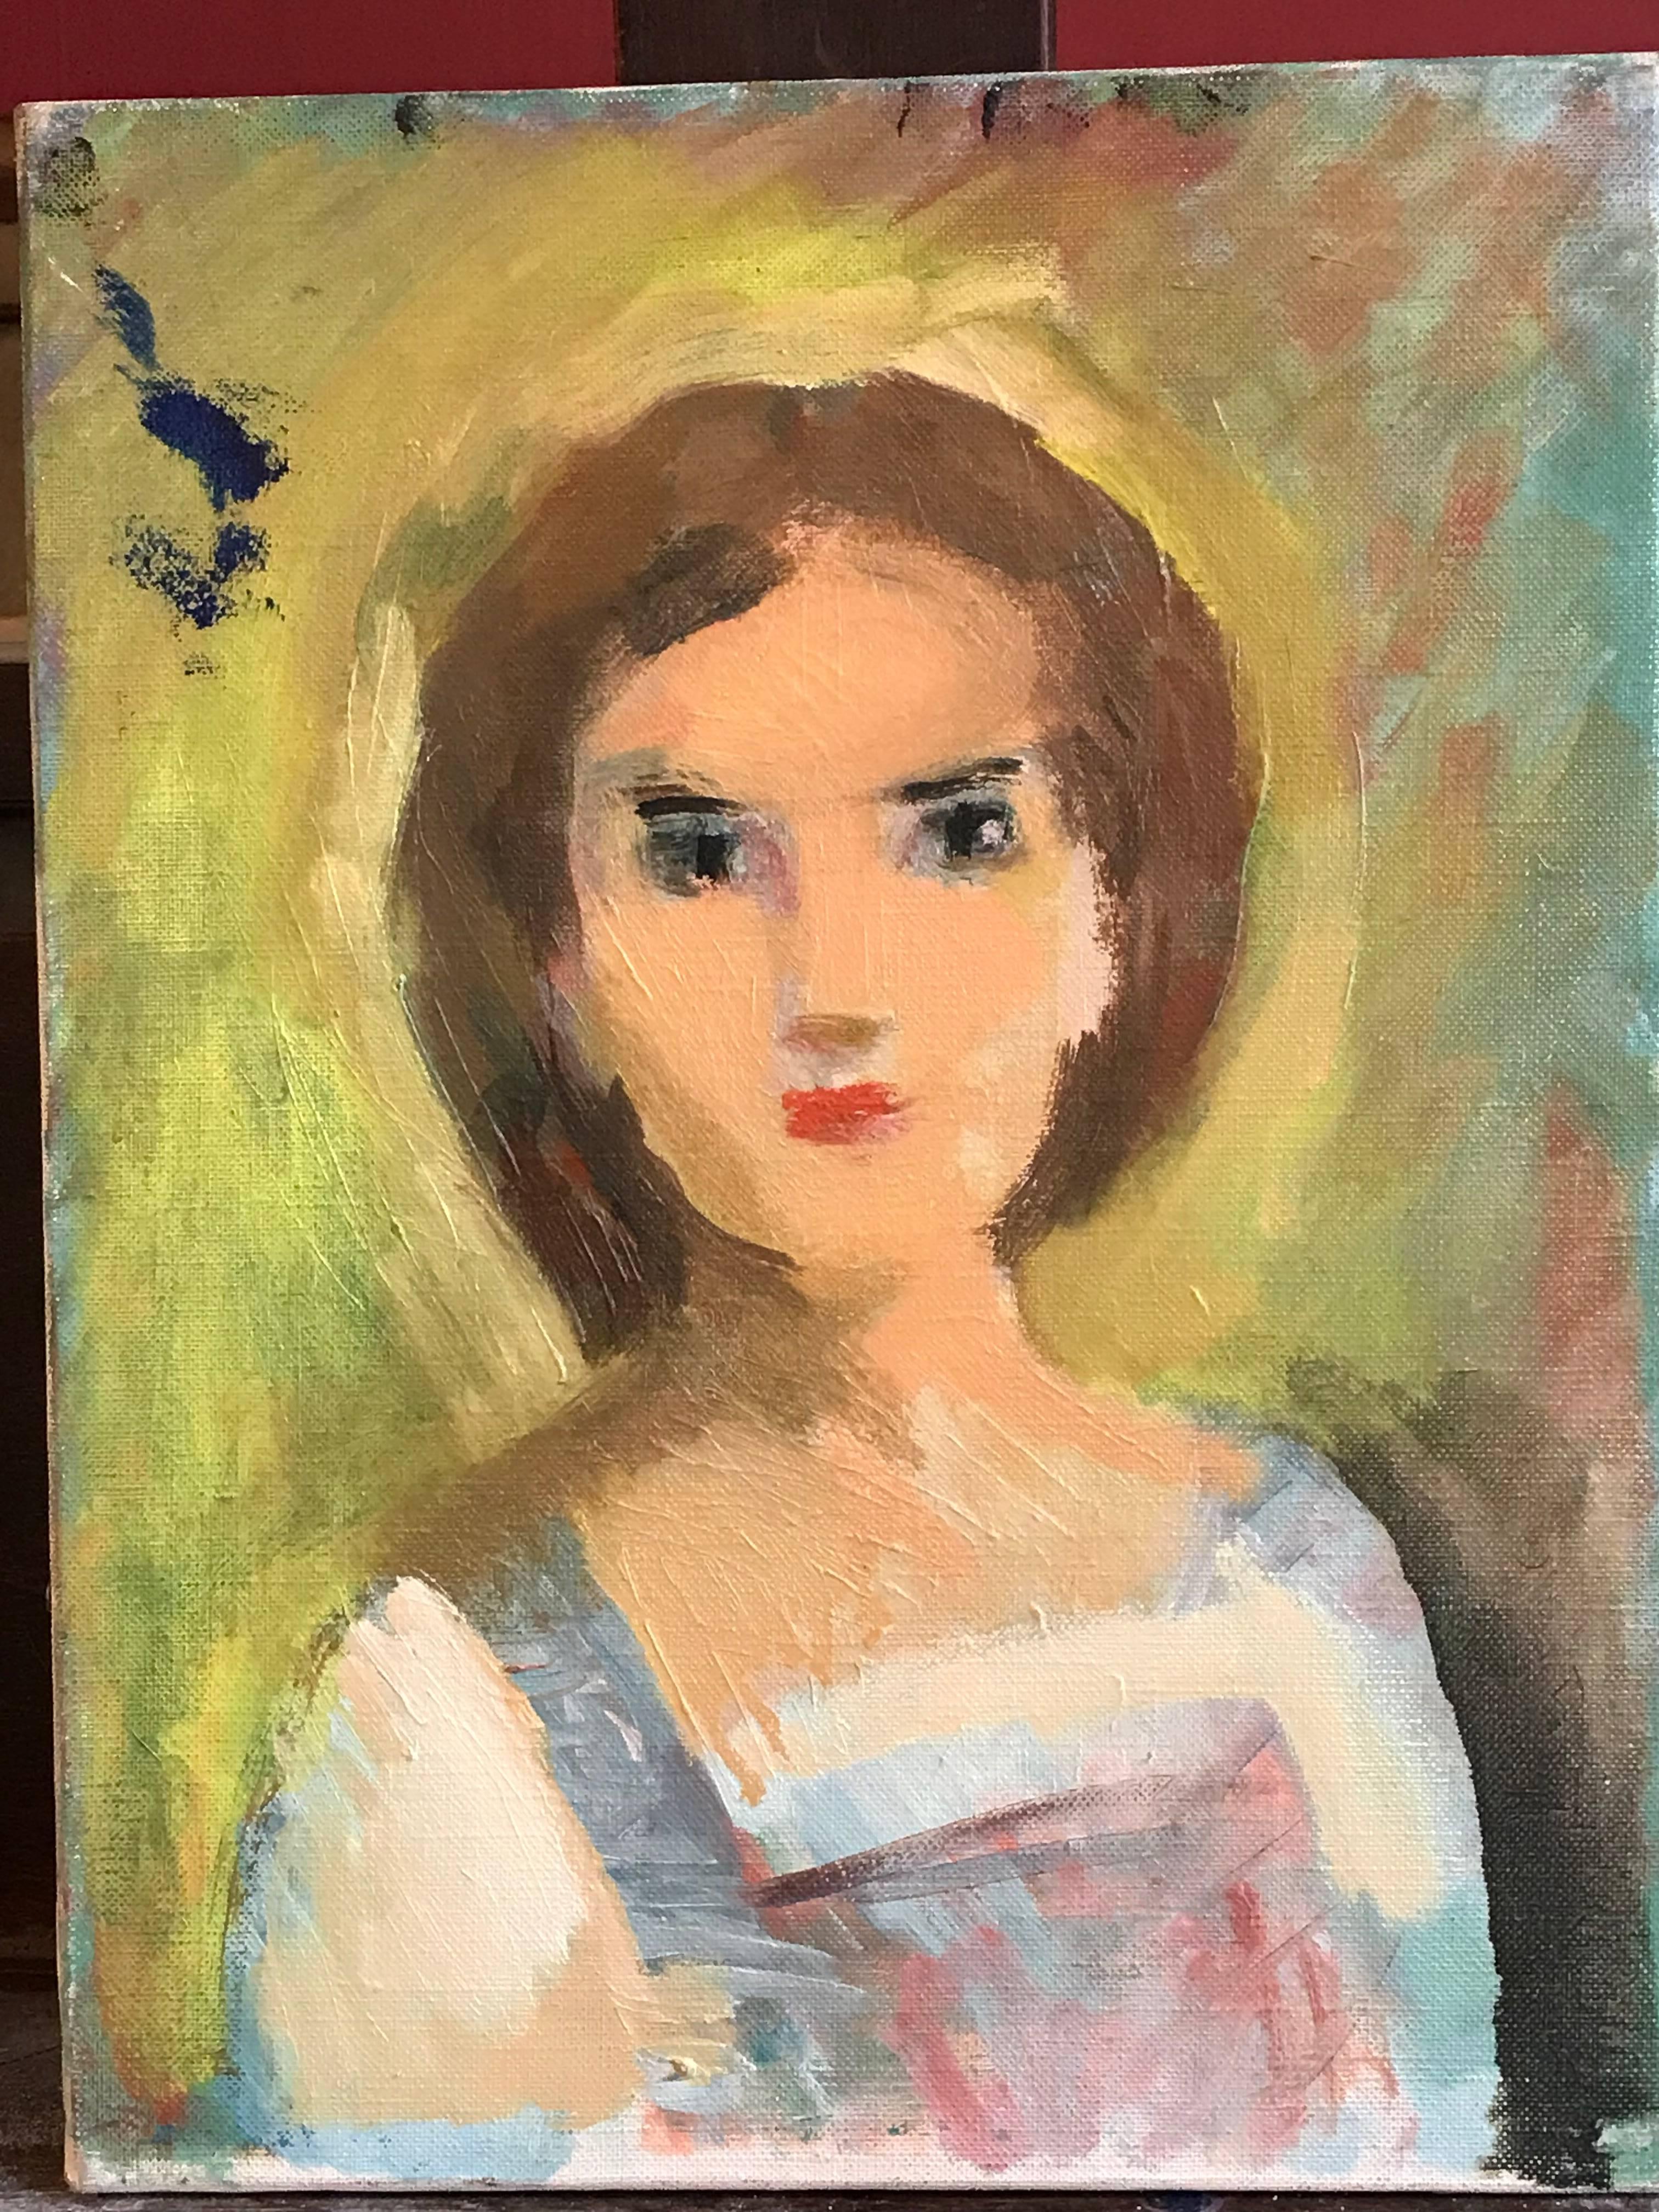 Jeune Femme
by Raymonde Heudebert (1905-1991)
oil painting on canvas, unframed

Provenance: 
private collection of the artists work, France

Lovely original oil painting by the well listed and much admired French painter, Raymonde Heudebert